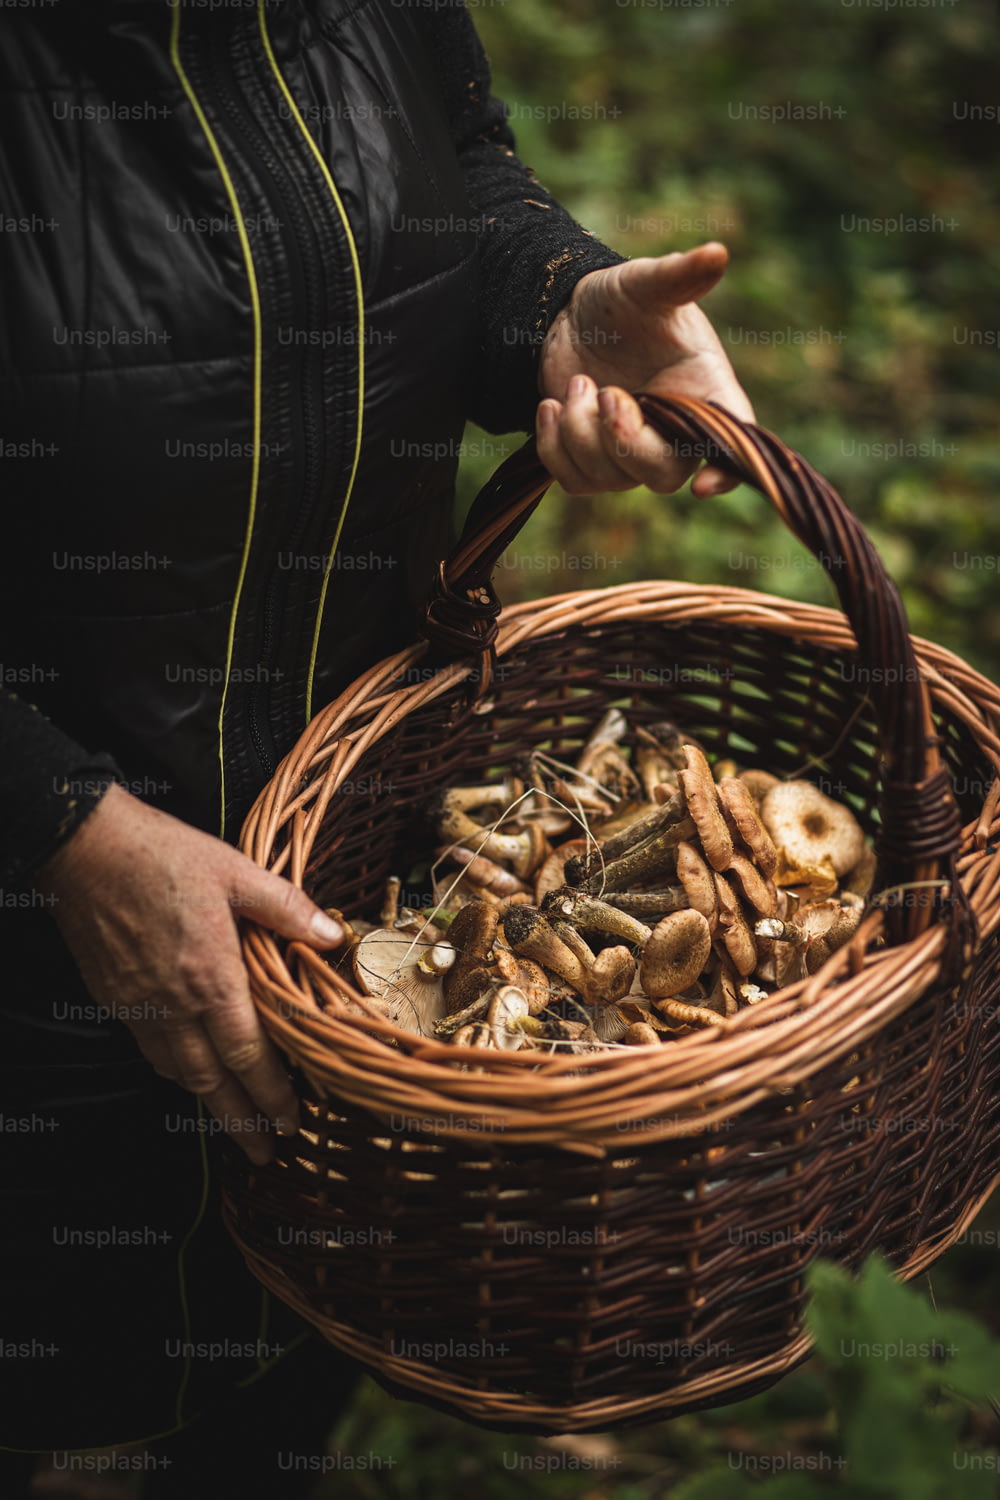 a person holding a basket full of mushrooms